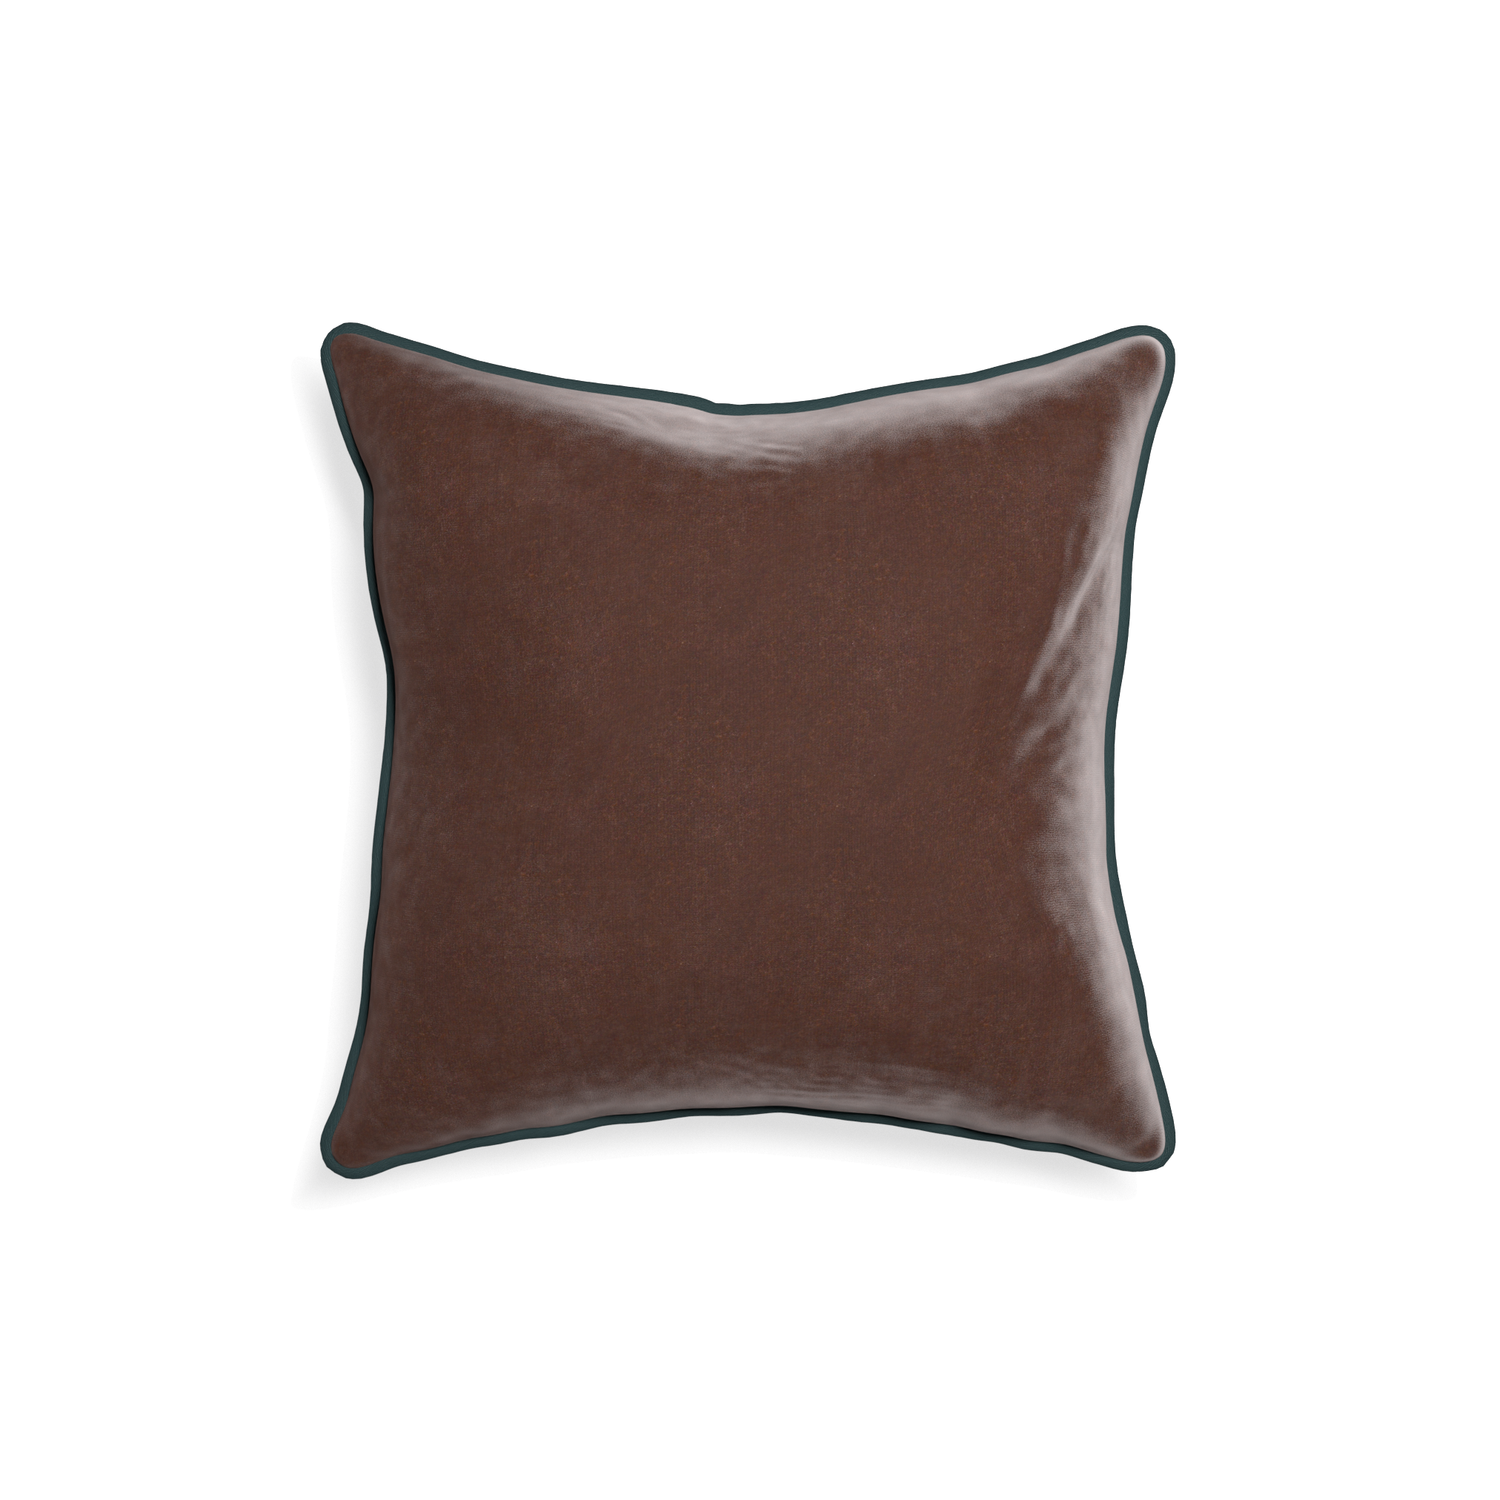 18-square walnut velvet custom brownpillow with p piping on white background